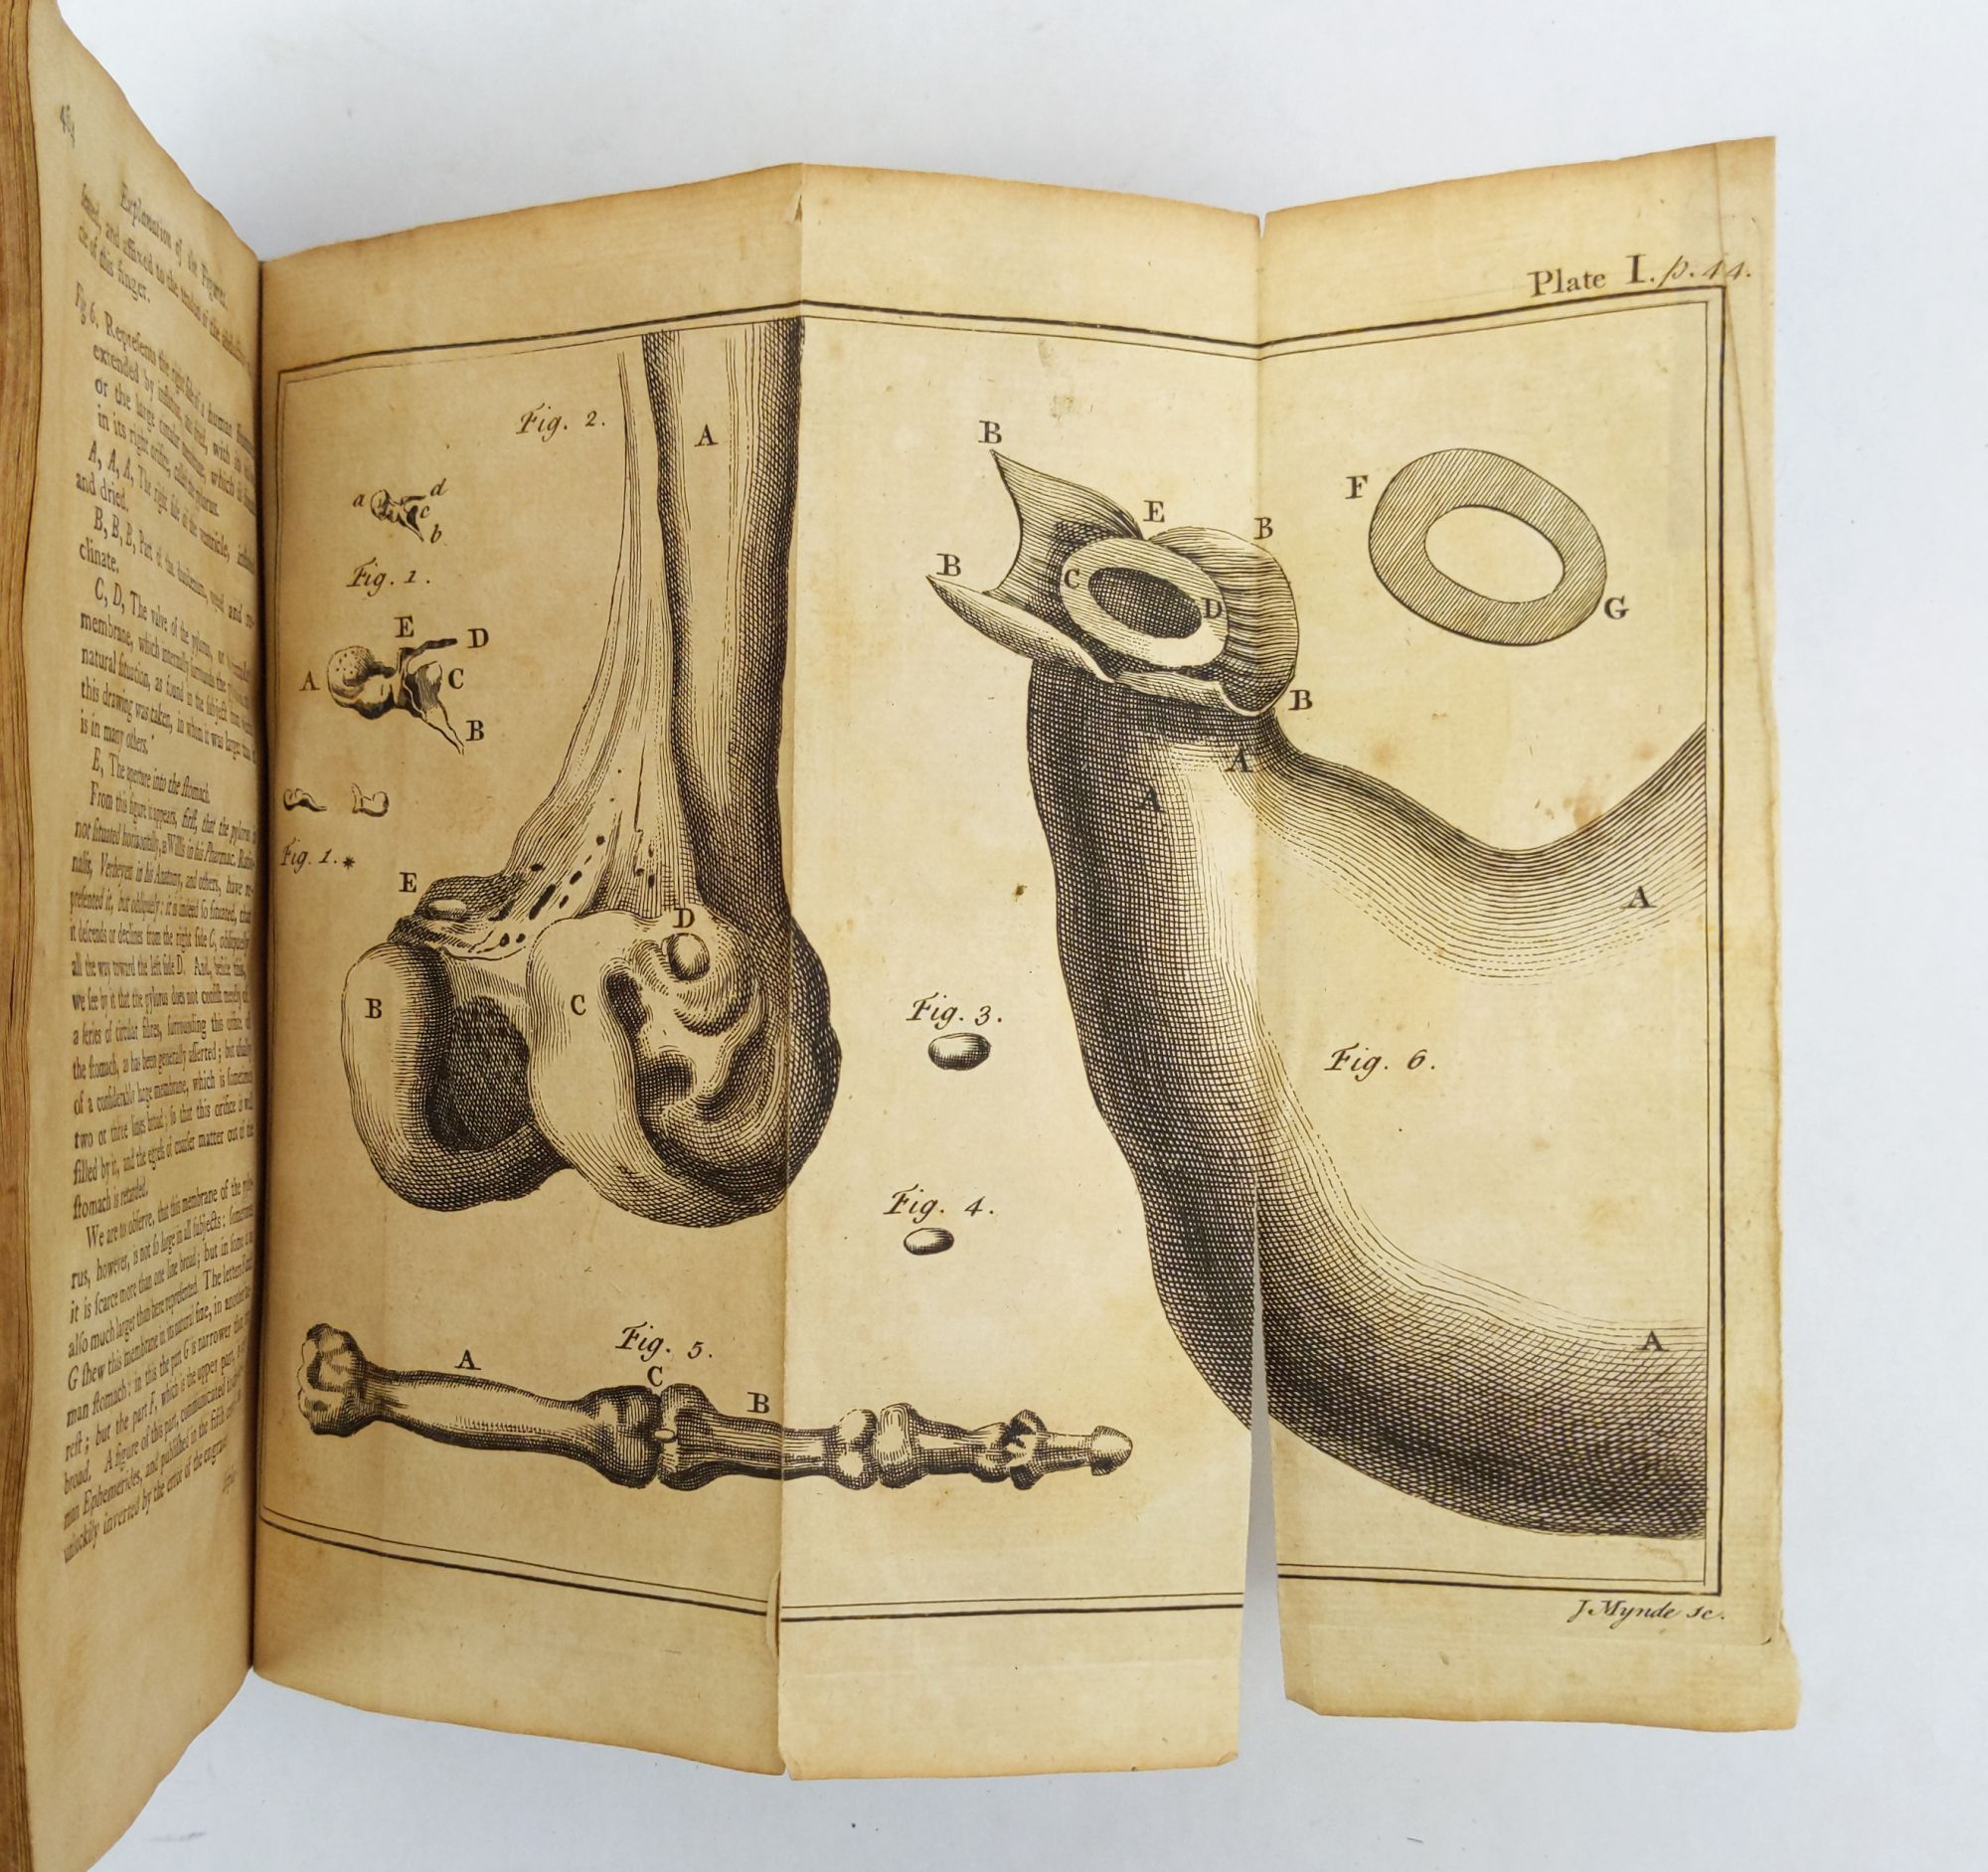 Product Image for A COMPENDIUM OF ANATOMY. IN WHICH ALL THE PARTS OF THE HUMAN BODY ARE SUCCINCTLY AND CLEARLY DESCRIBED; AND THEIR USES EXPLAINED. TRANSLATED FROM THE LAST EDITION OF THE ORIGINAL LATIN: GREATLY AUGMENTED AND IMPROVED BY THE AUTHOR. TO WHICH ARE ADDED, NOT